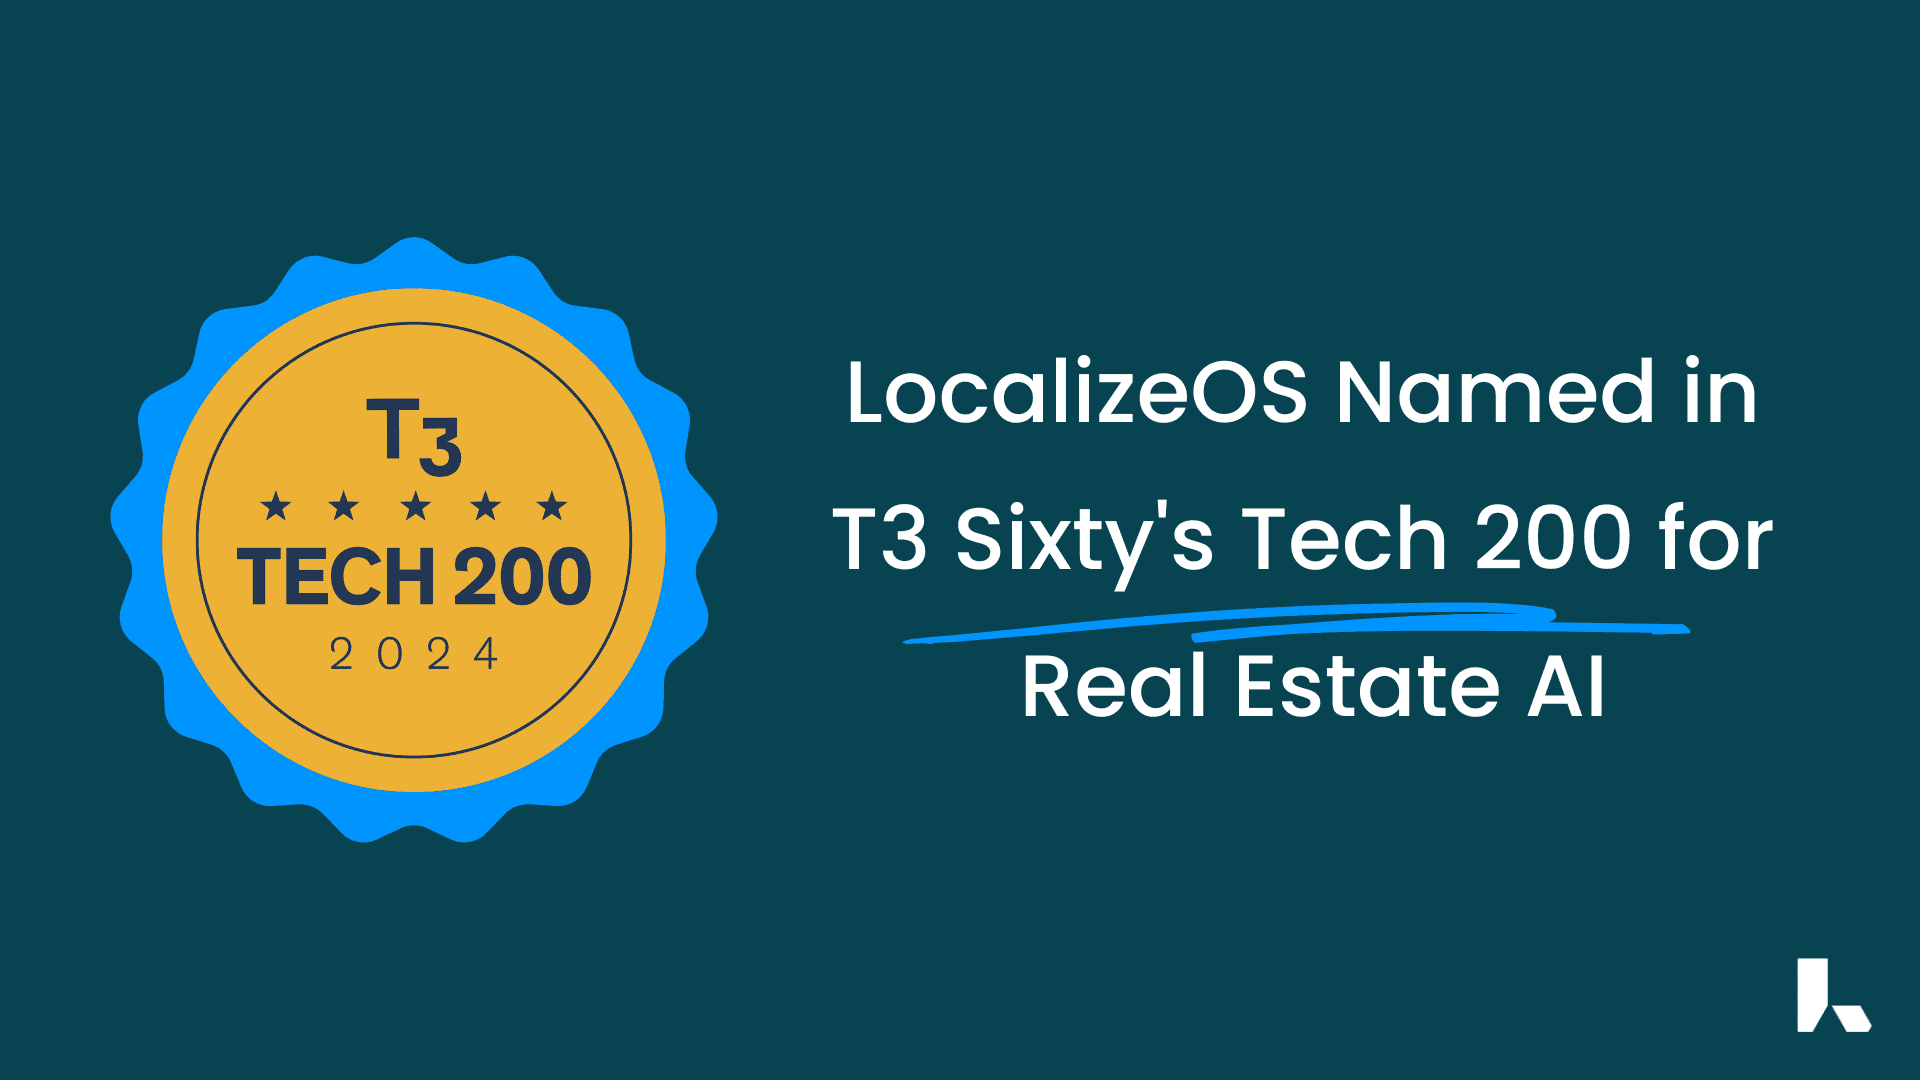 LocalizeOS Named in T3 Sixty’s Tech 200 for Real Estate AI